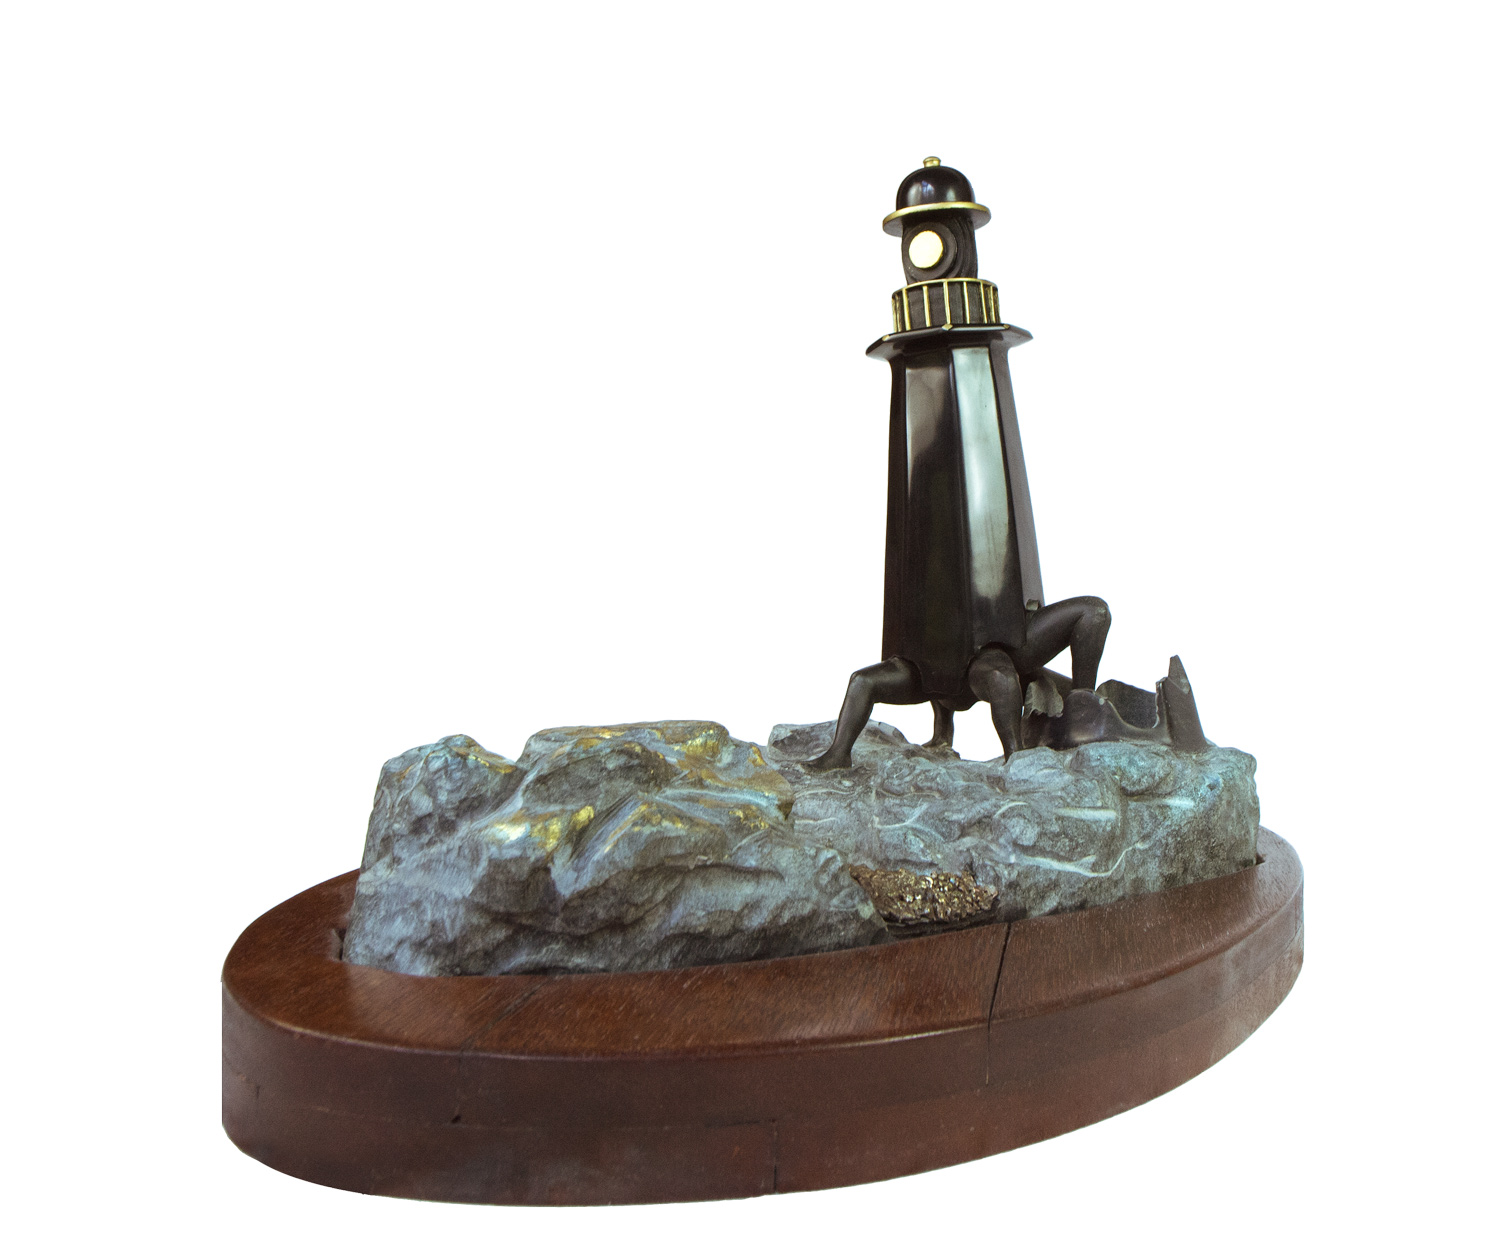 At last, the lighthouse painted with bronze river and wooden base